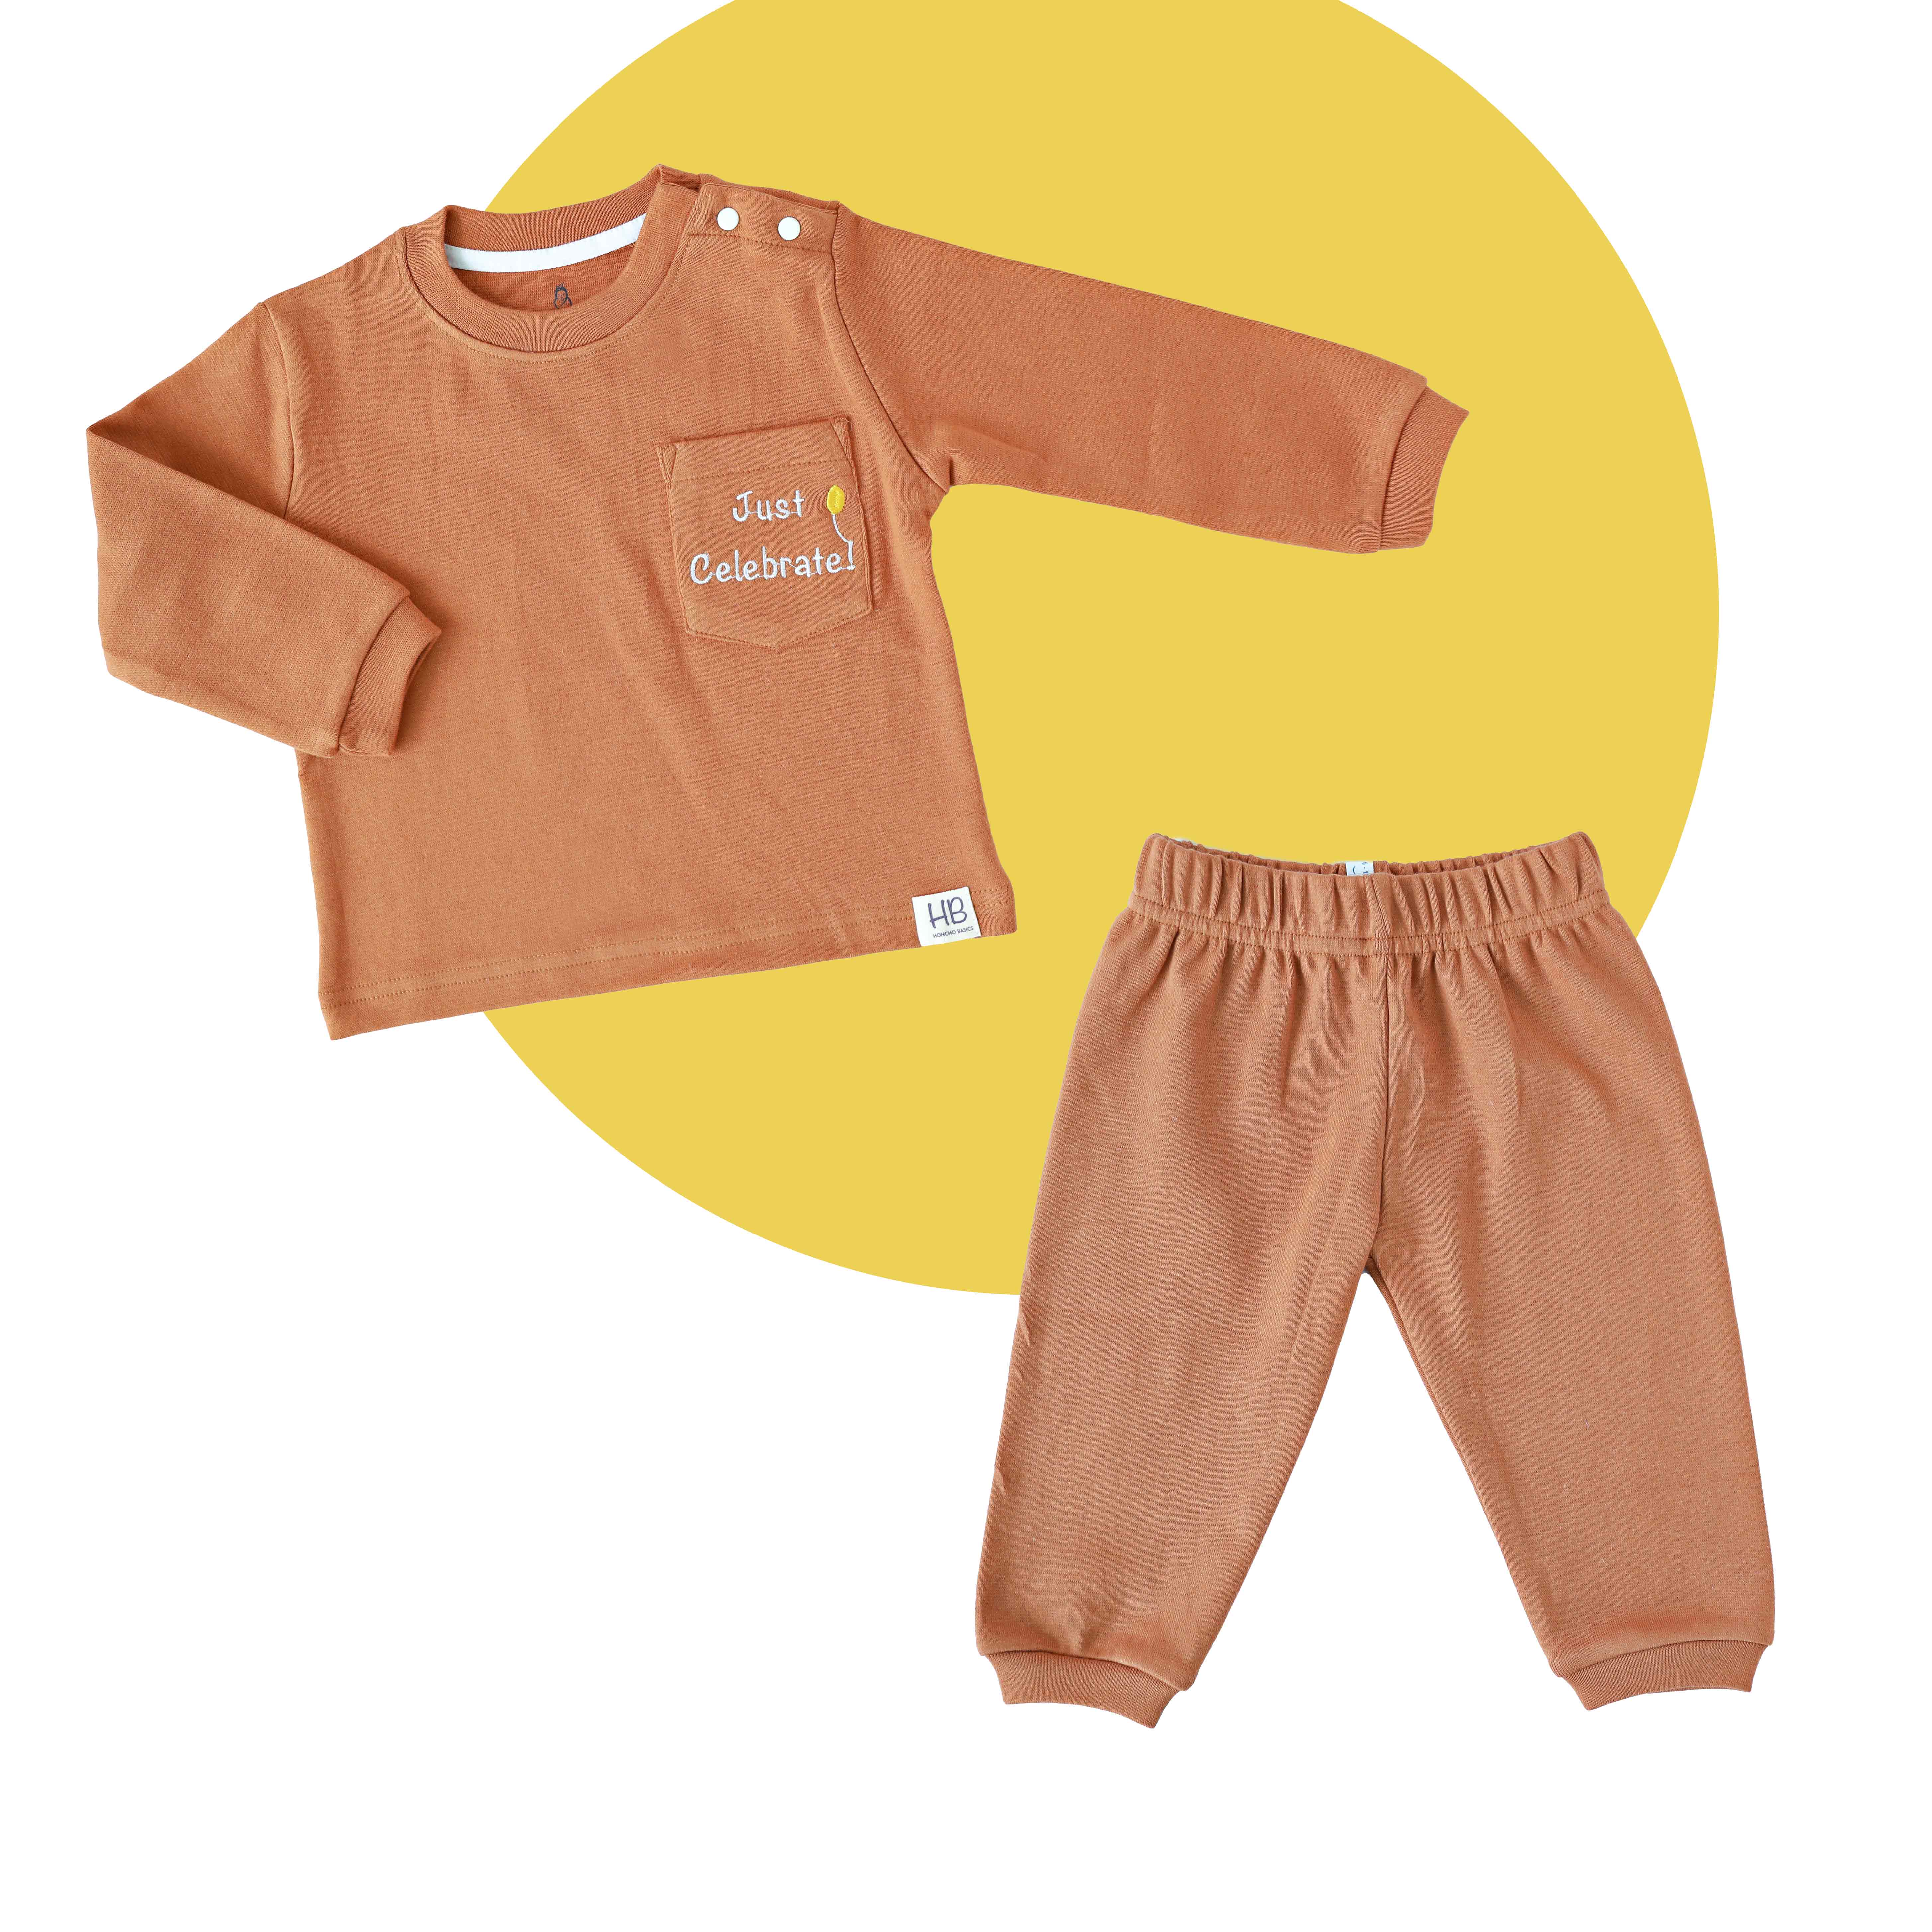 Just Celebrate - Round Neck Full Sleeve Top and Pant ( 0 - 4 years ) 1 Pack